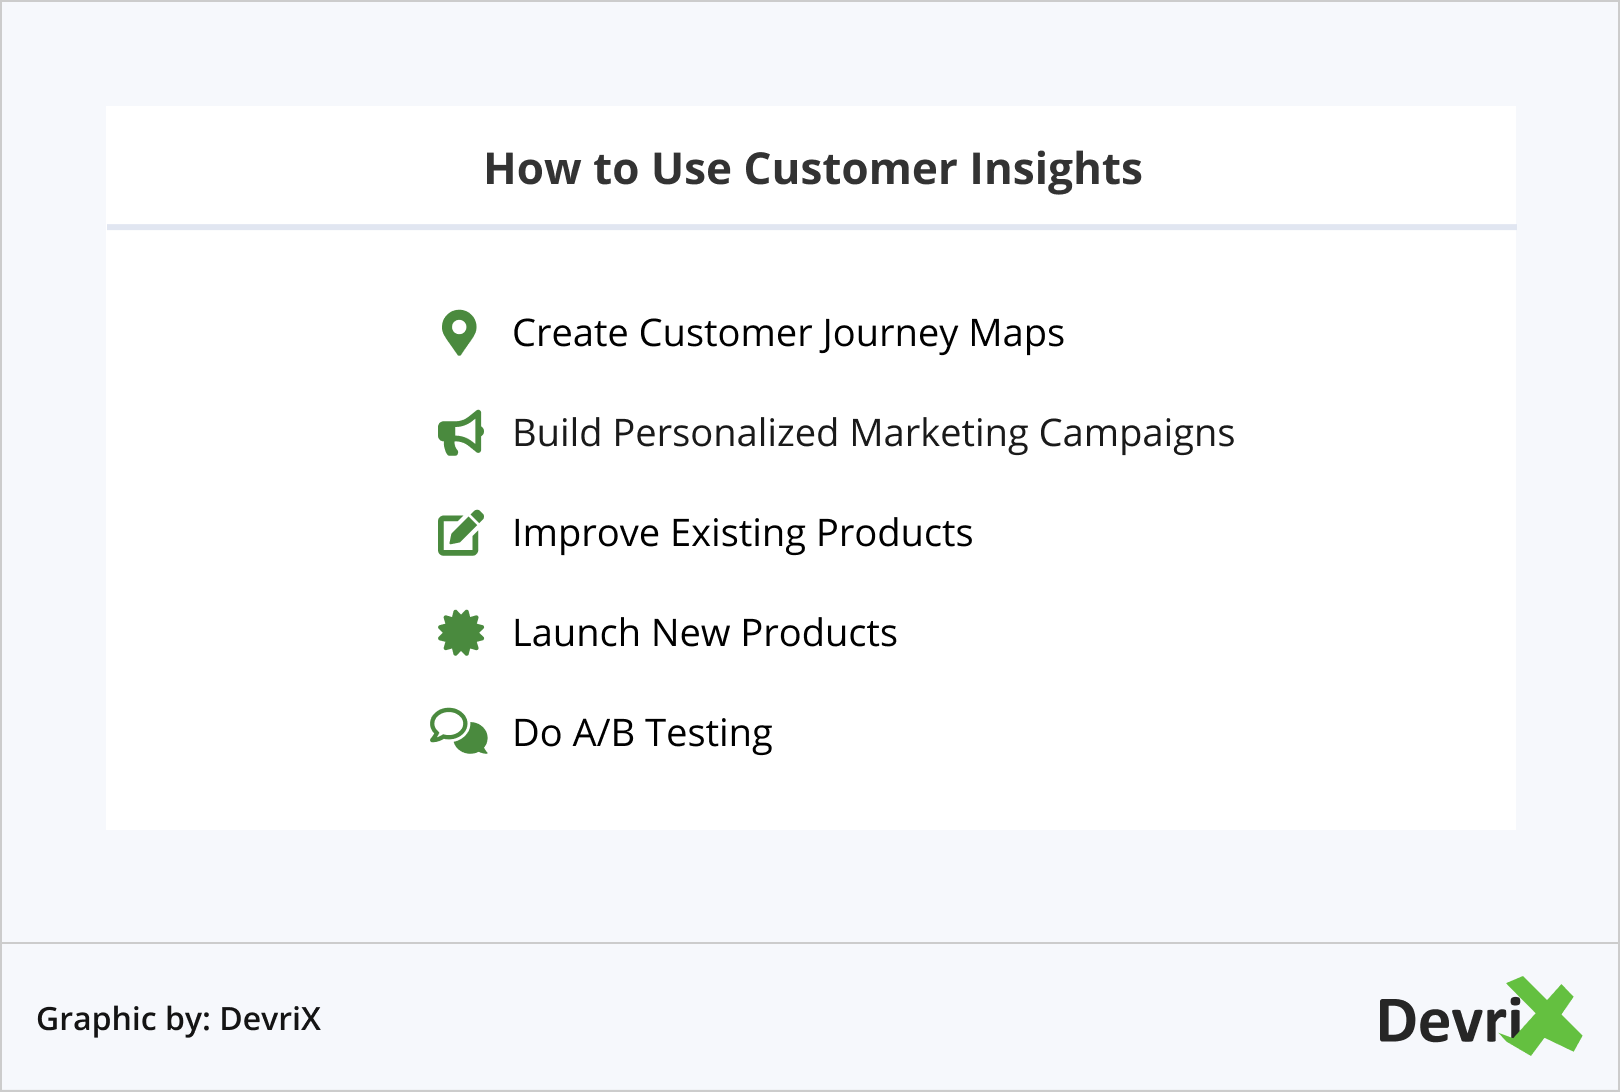 How to Use Customer Insights